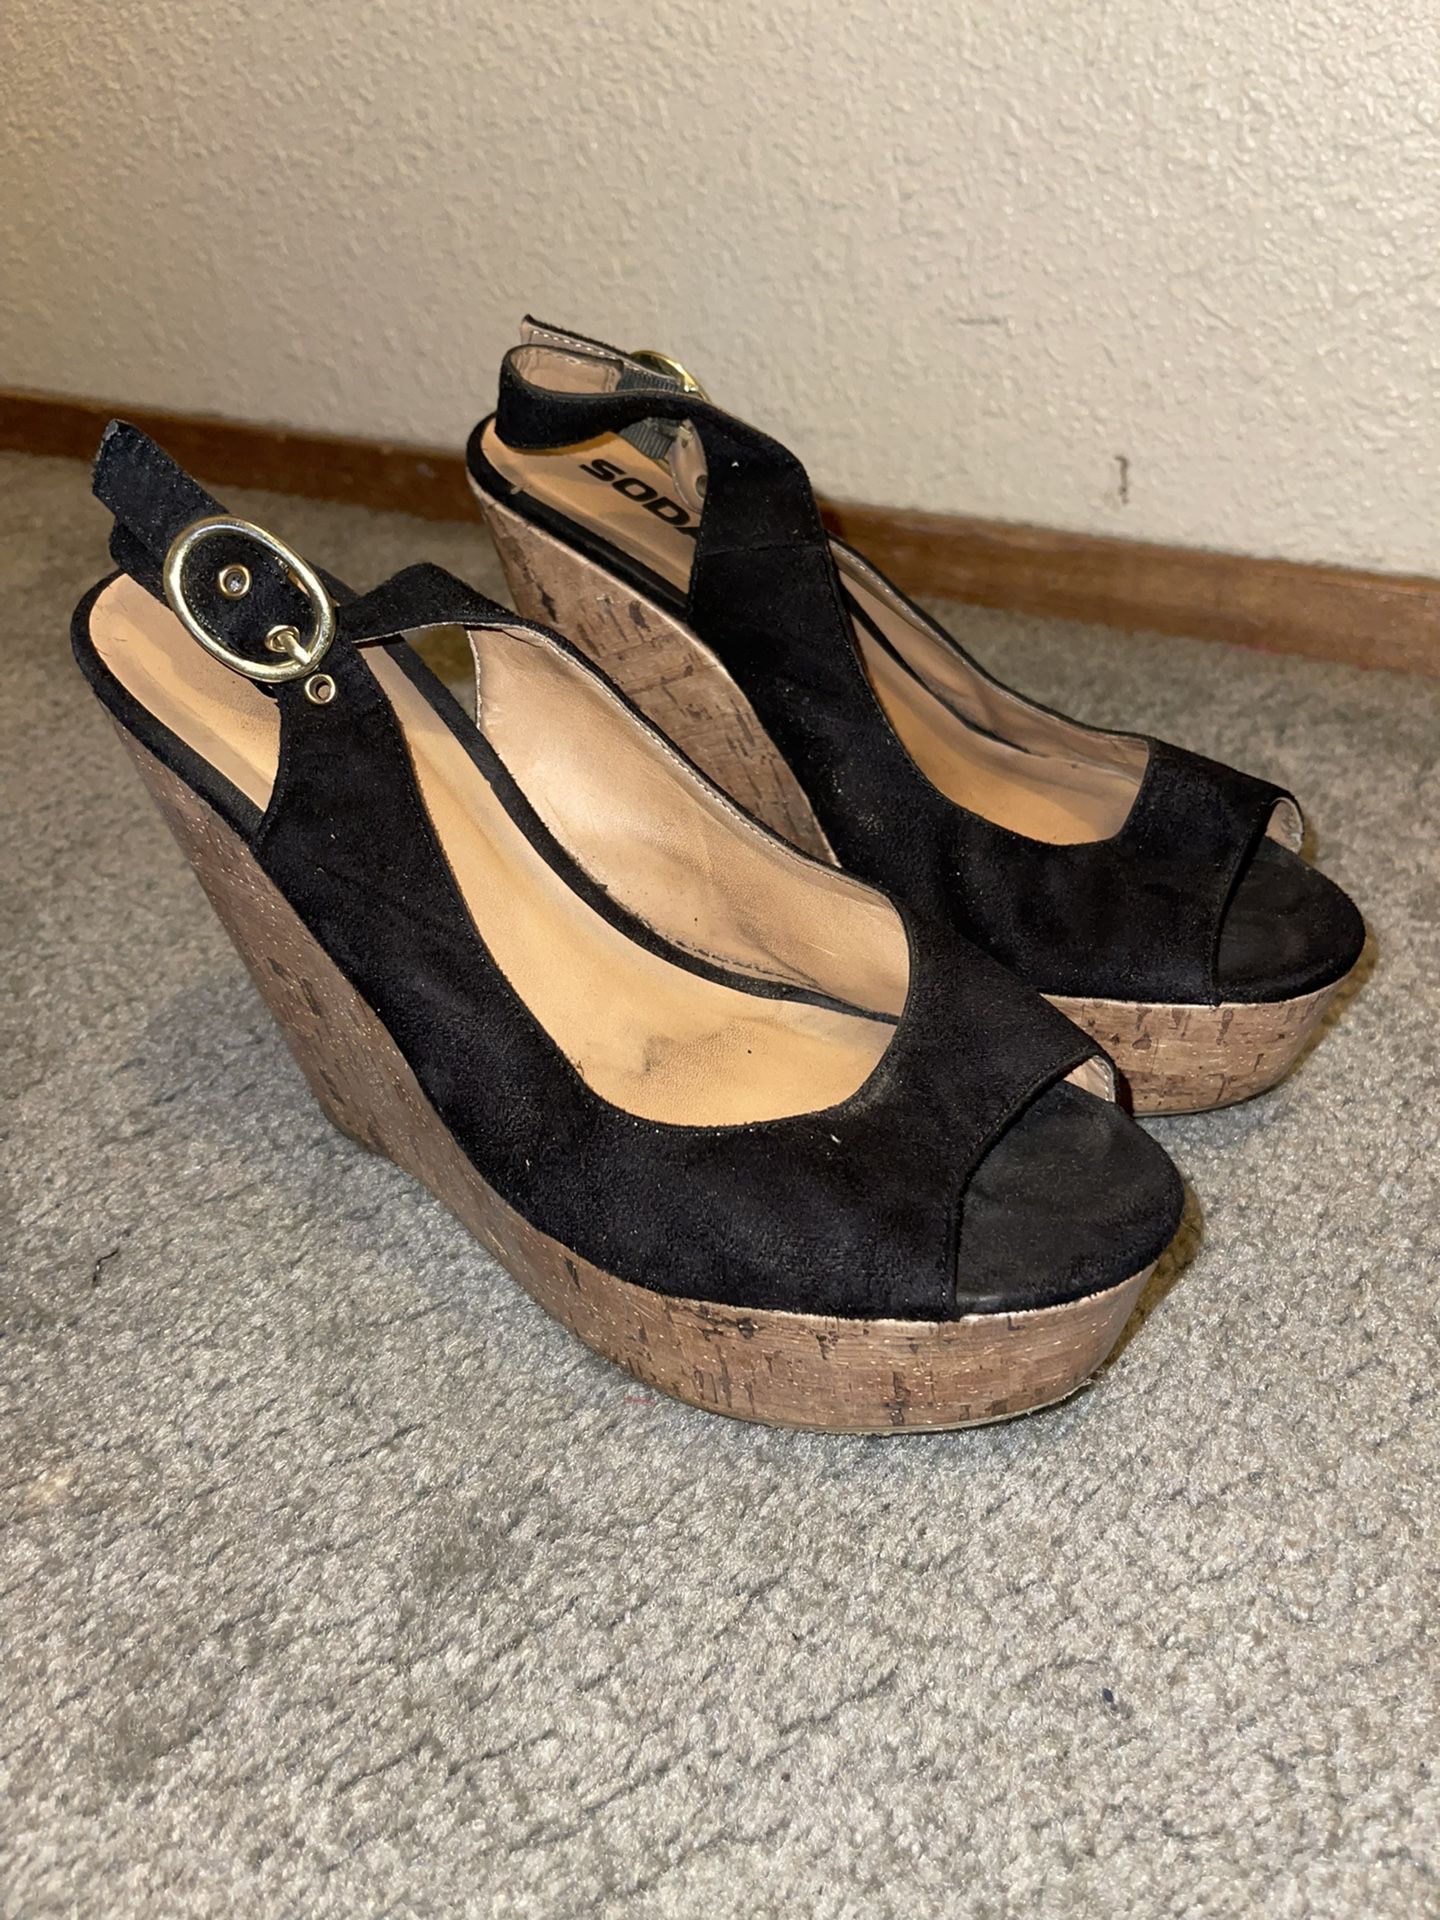 Excellent Condition Soda Tall Wedge Black Suede Heels Size 8/8.5